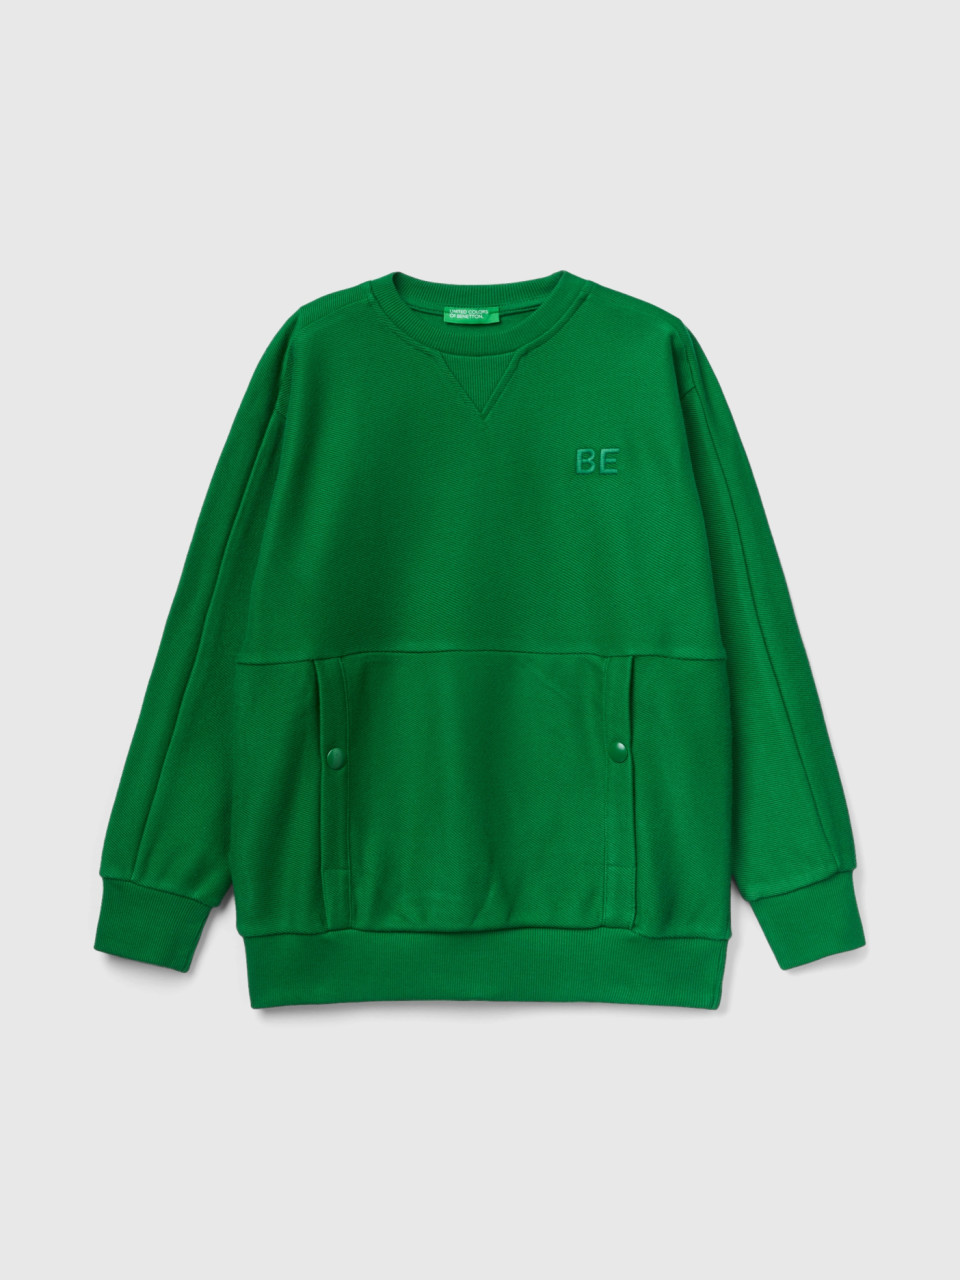 Benetton, Sweatshirt With Pockets And be Embroidery, Green, Kids